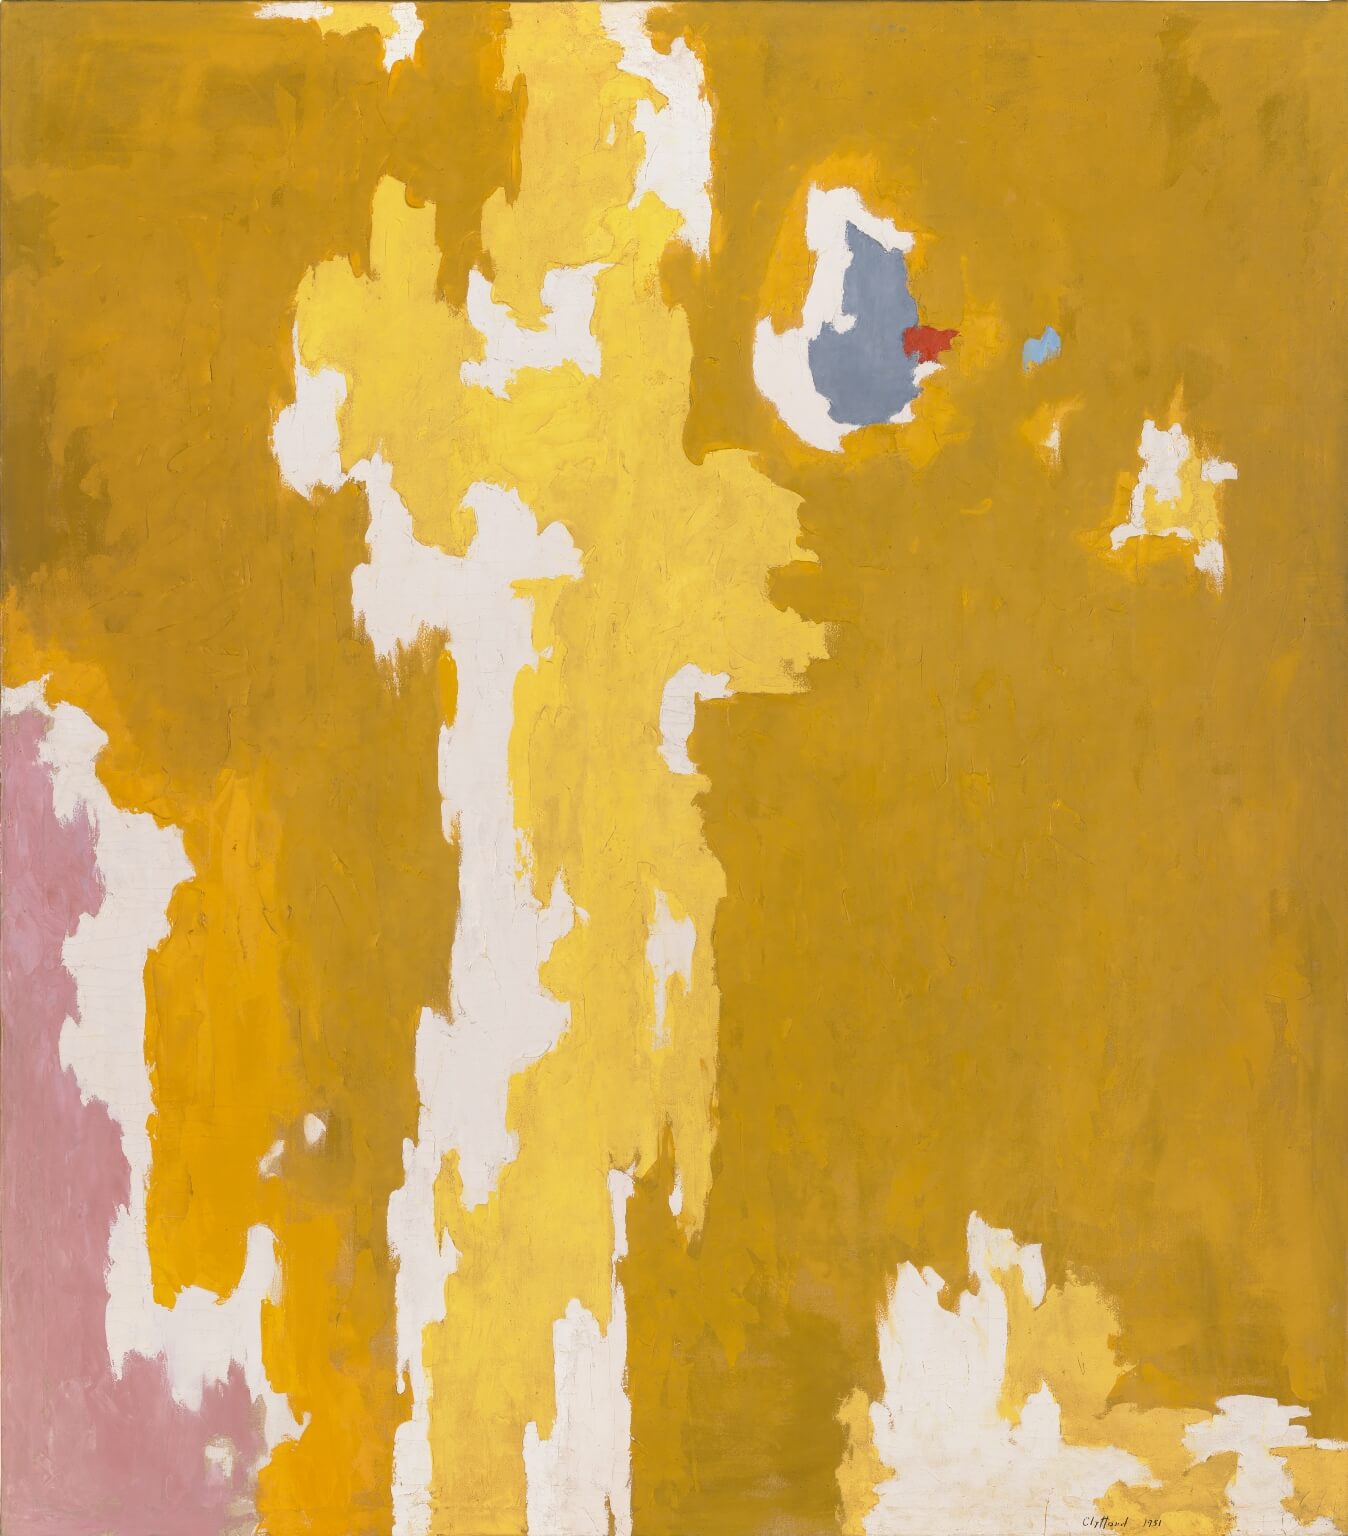 Abstract oil painting with gold, yellow, white, and small areas of pink and light blue